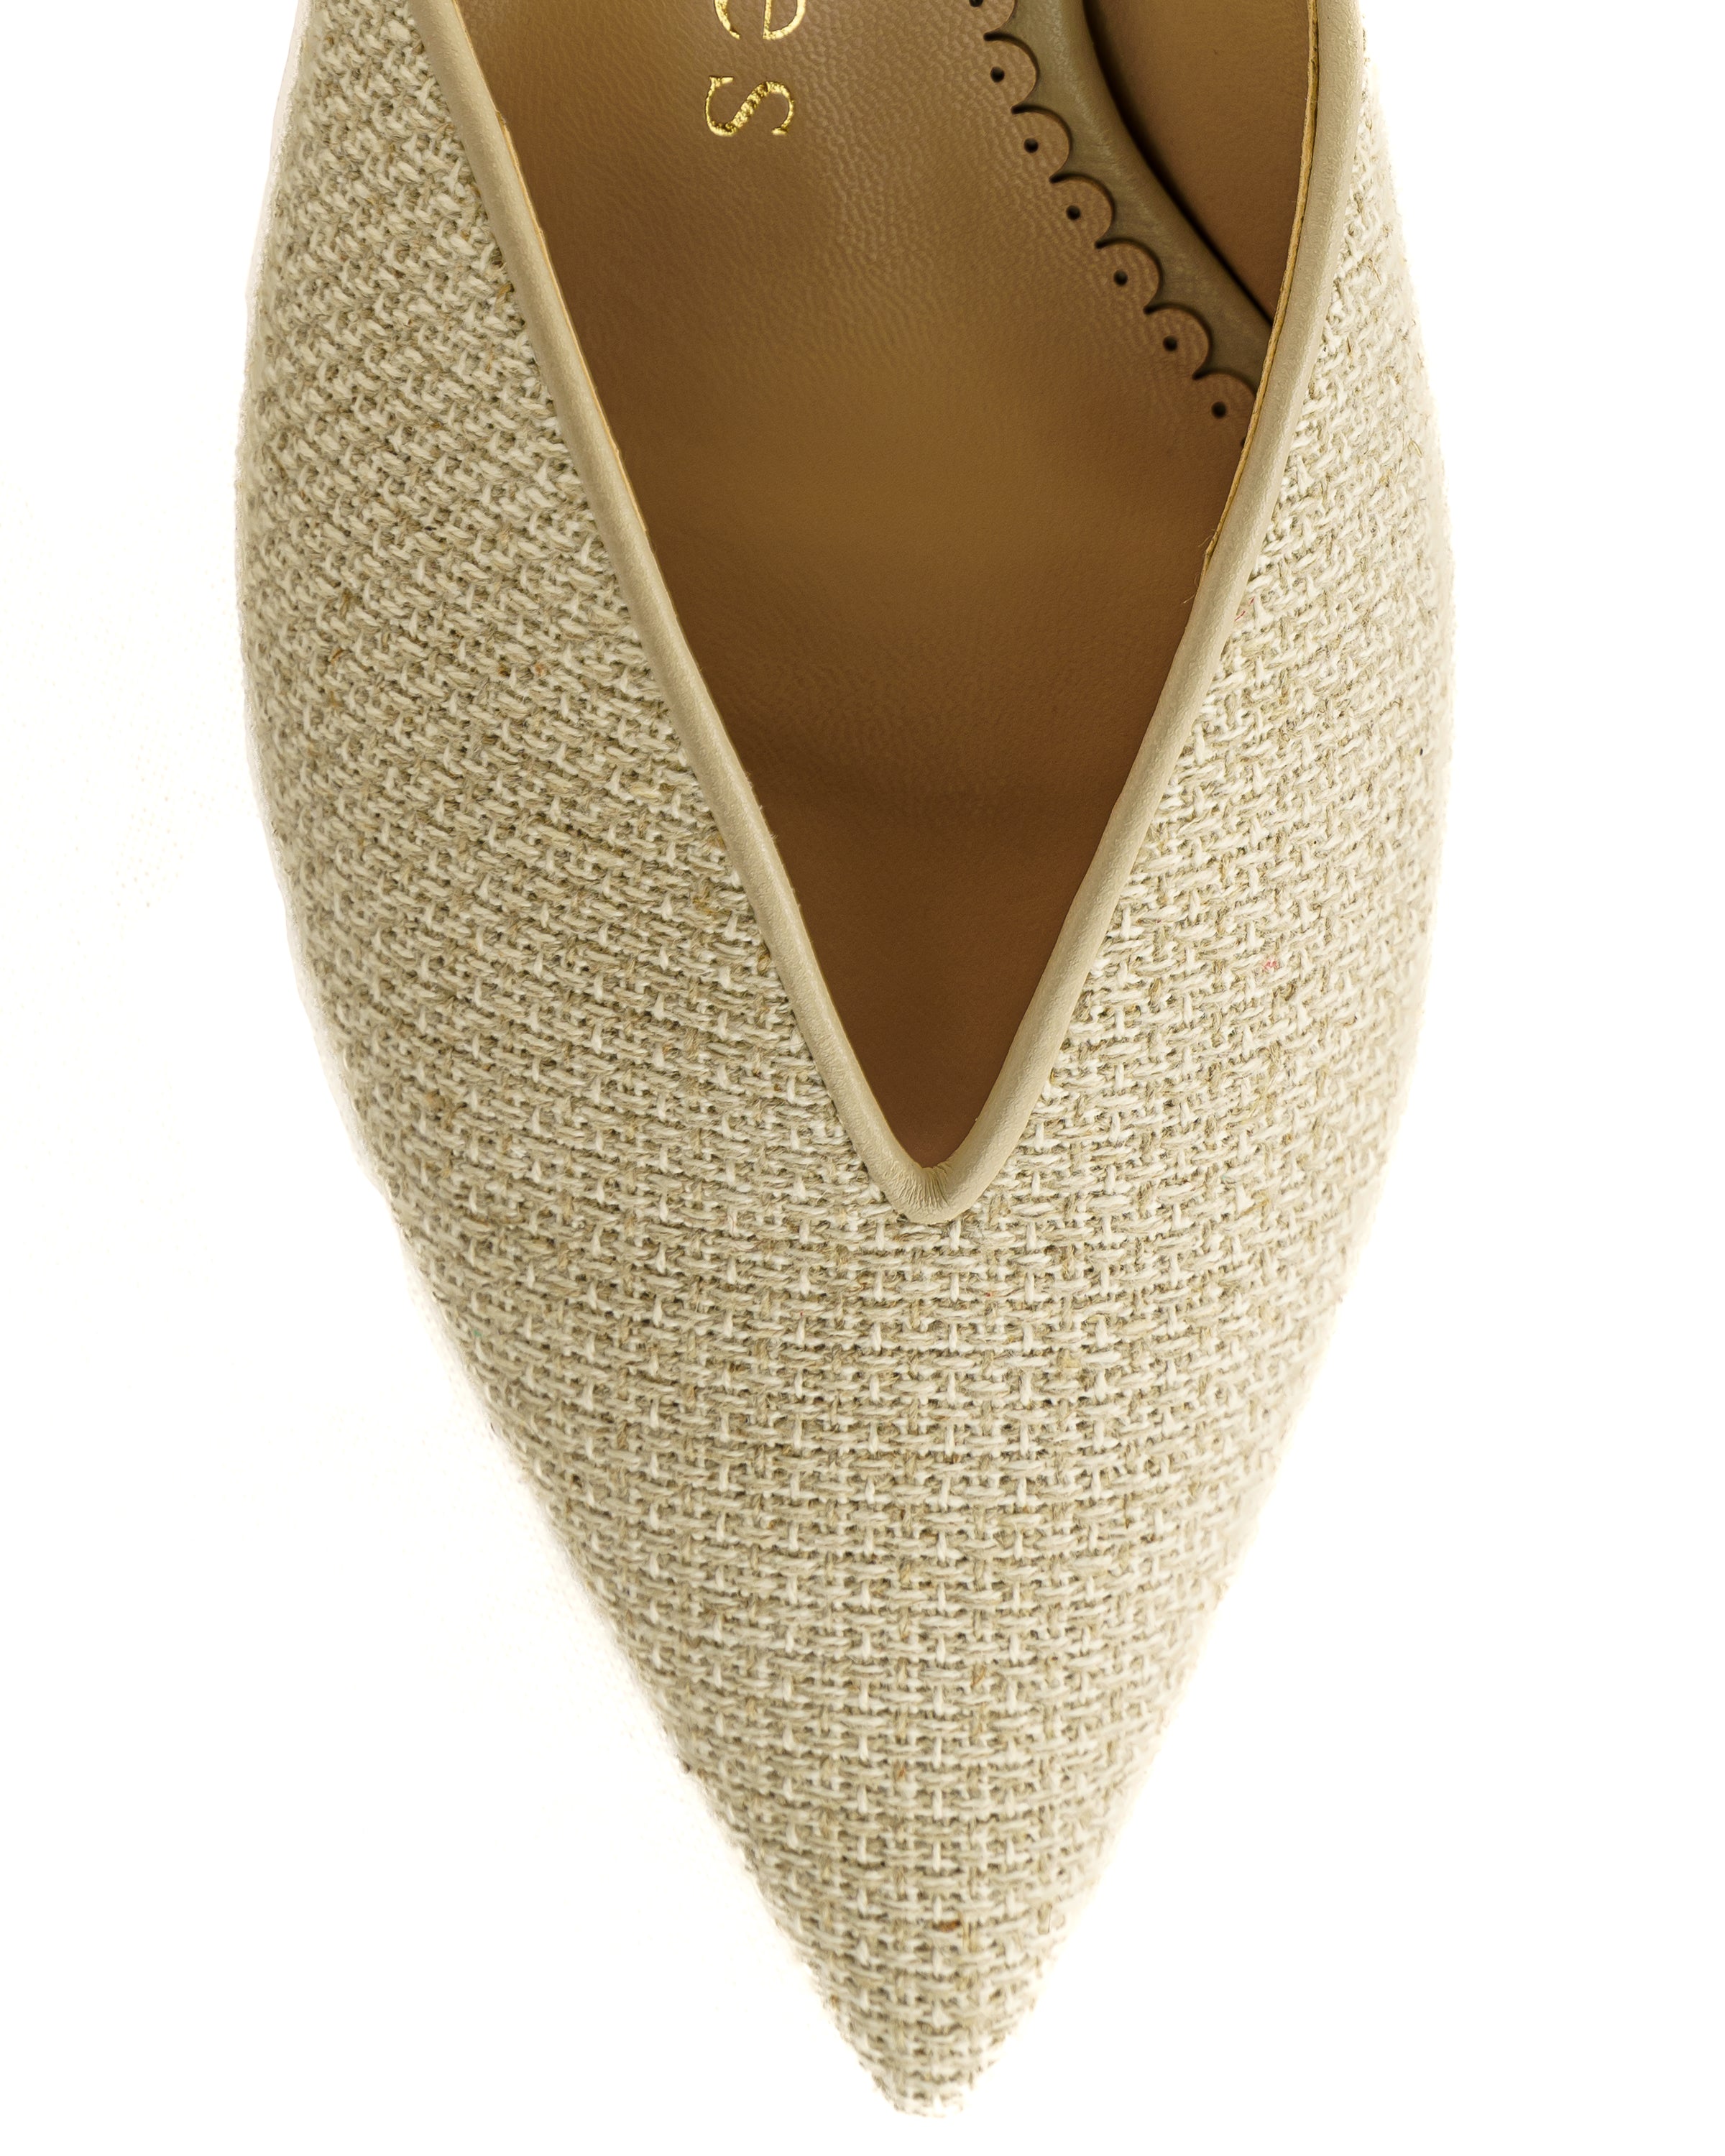 Natural linen sandal heels with slip-on design - top view